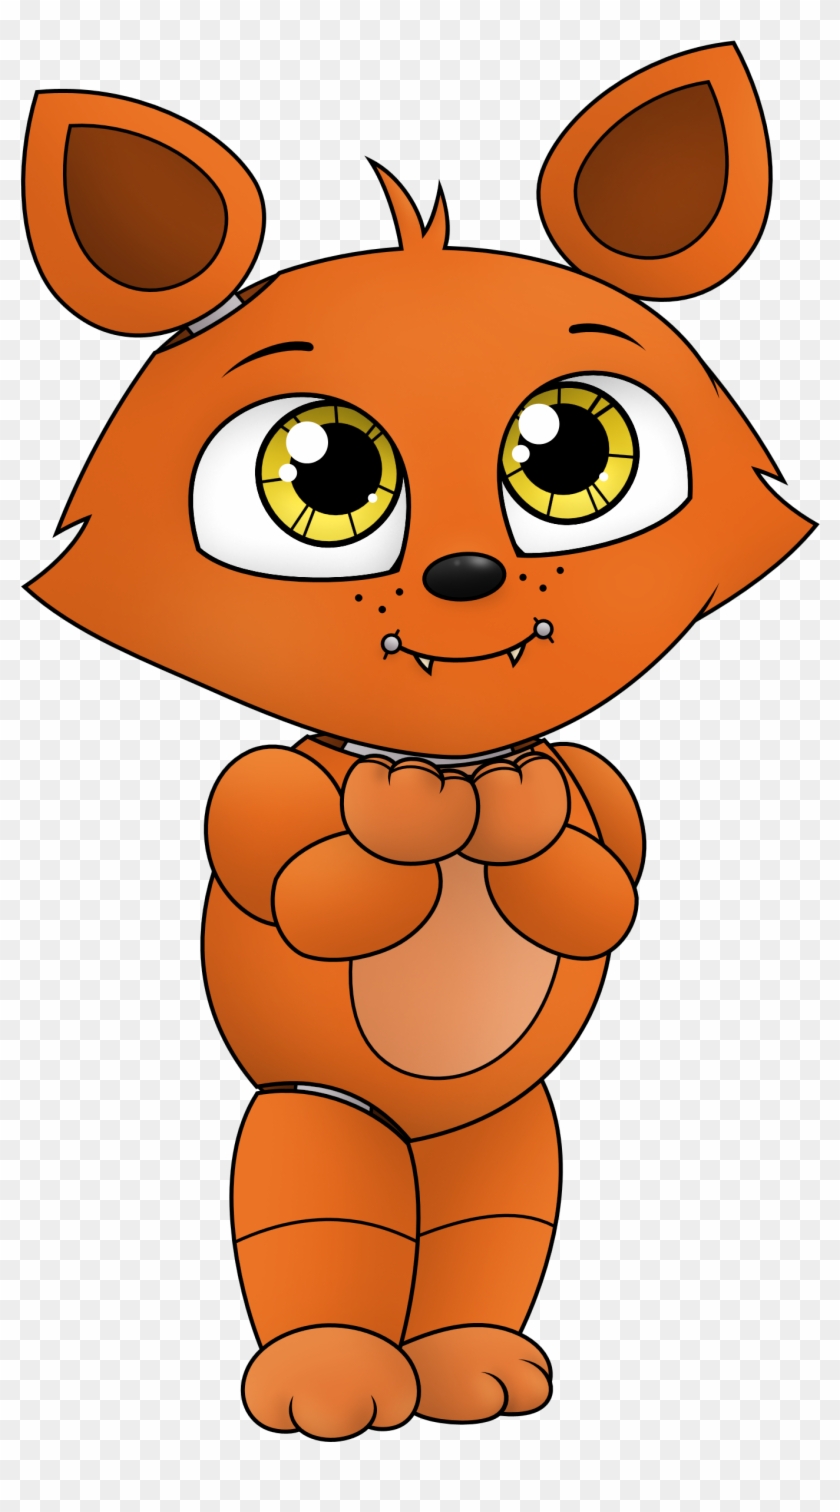 Baby Foxy - Baby Foxy Five Nights At Freddy's #721606